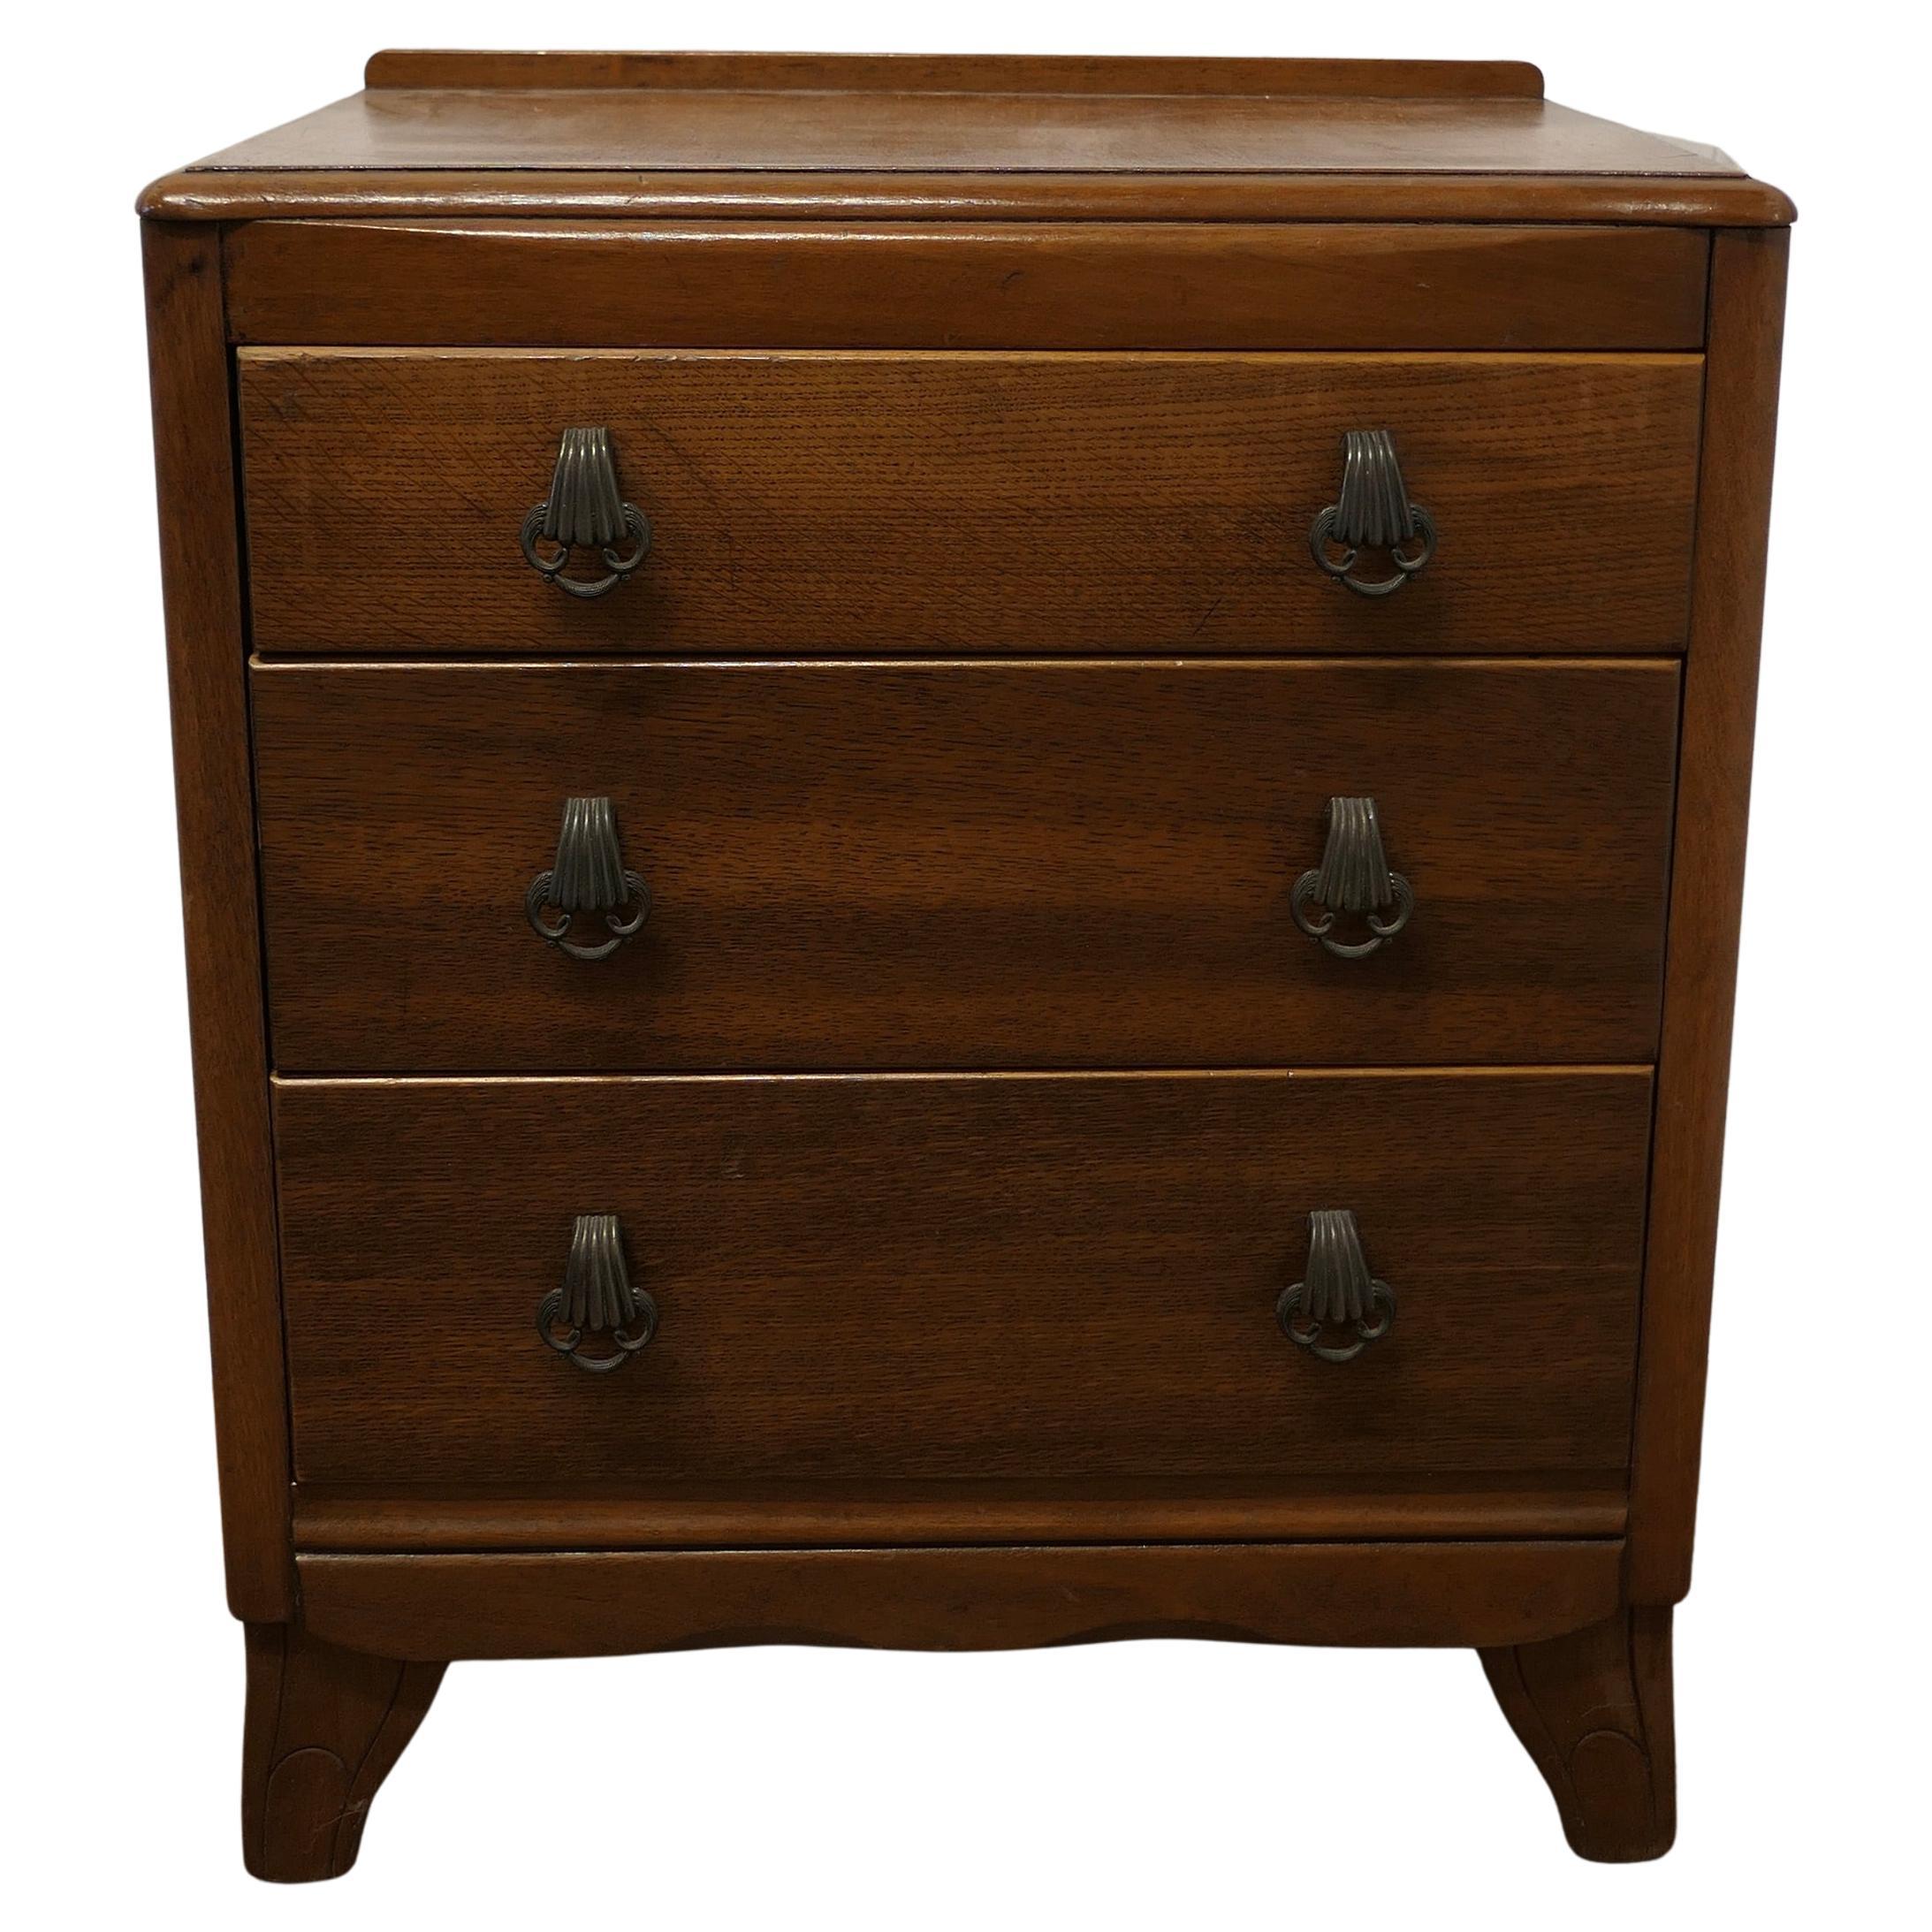 Art Deco Golden Oak Chest of Drawers by Lebus This Is a Classic Piece For Sale